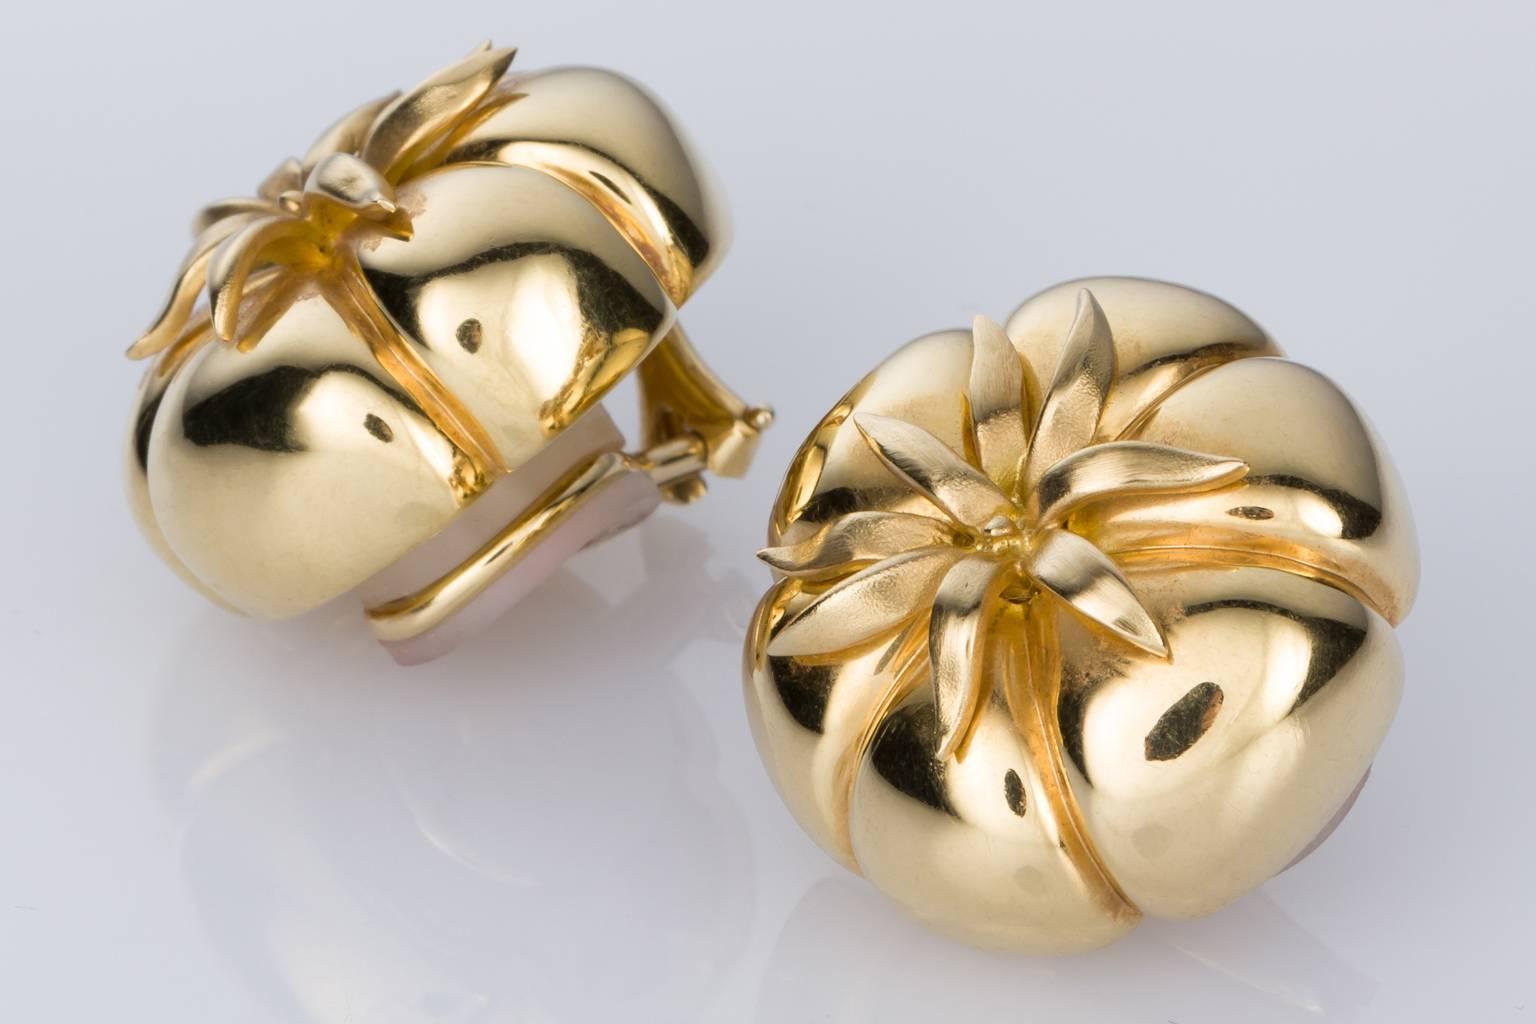 Do you want your jewellery to be noticed? Then these stunning 18k Judith Leiber earrings are for you. Fashioned with an heirloom tomato in mind these earrings look amazing on the ear. Signed Judith Leiber, stamped 750, they are highly polished